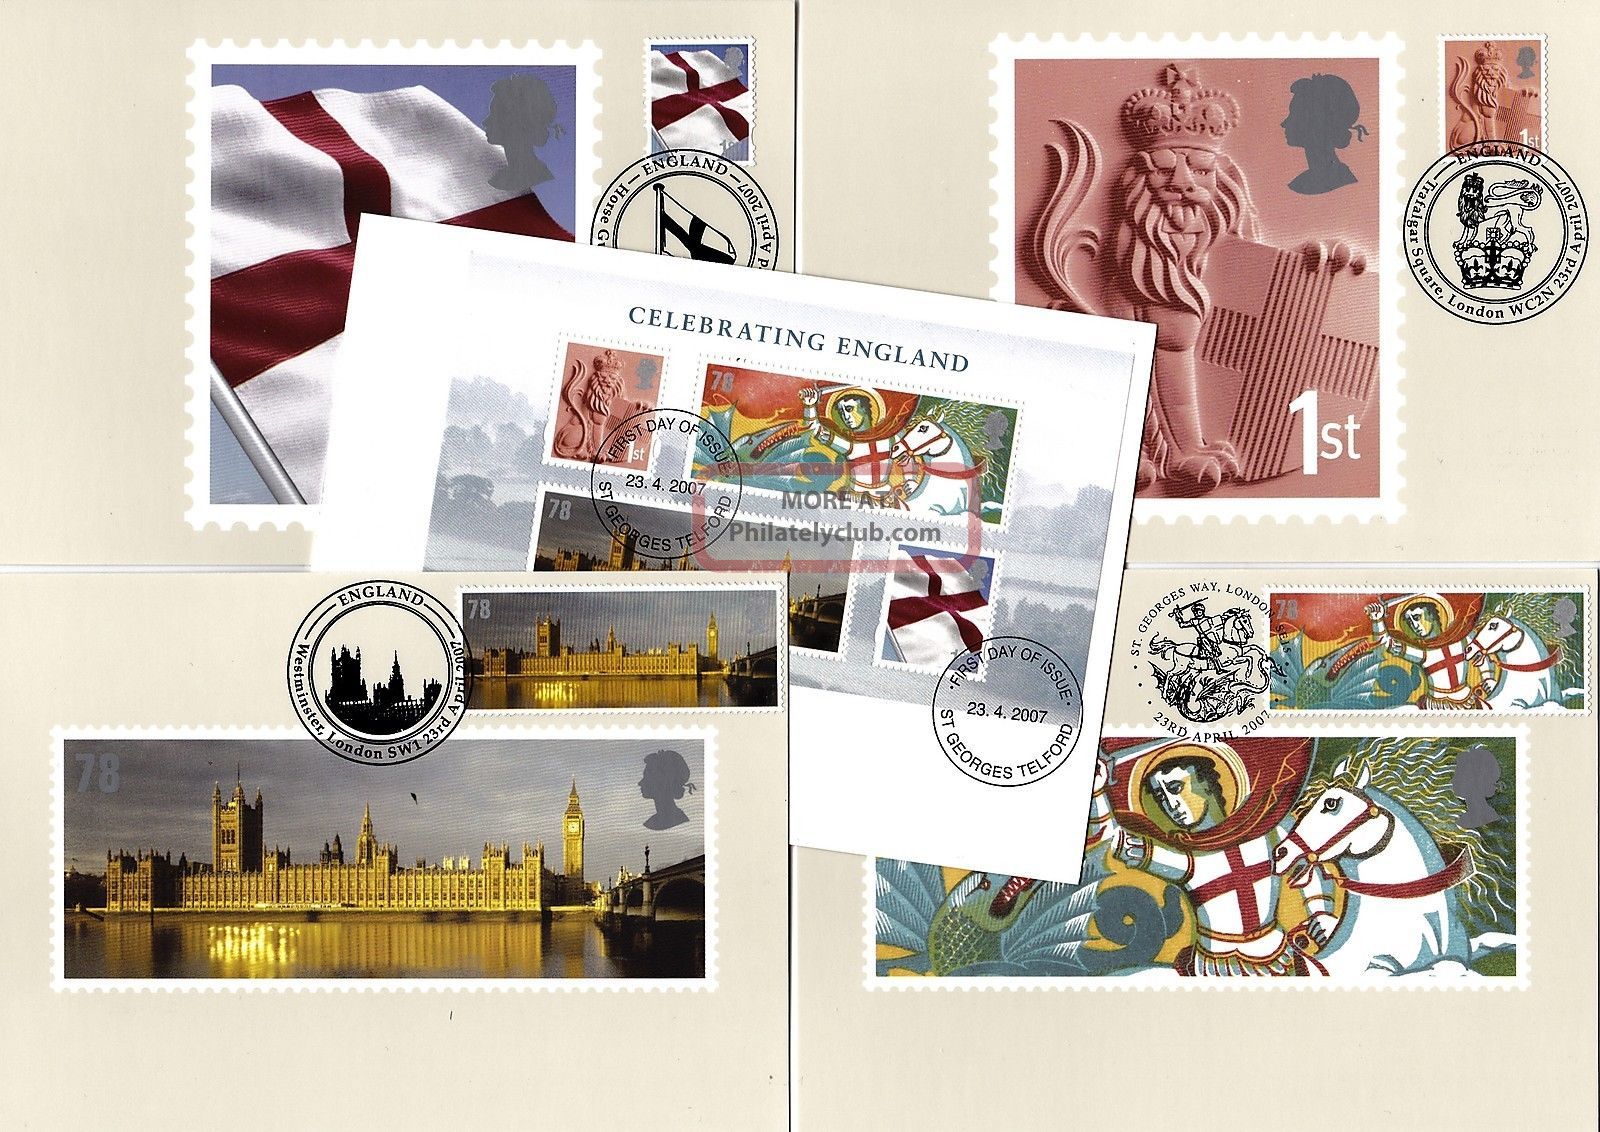 2007 Celebrating England Phq Cards With Related Fdi Handstamps No Cgb3 Great Britain photo